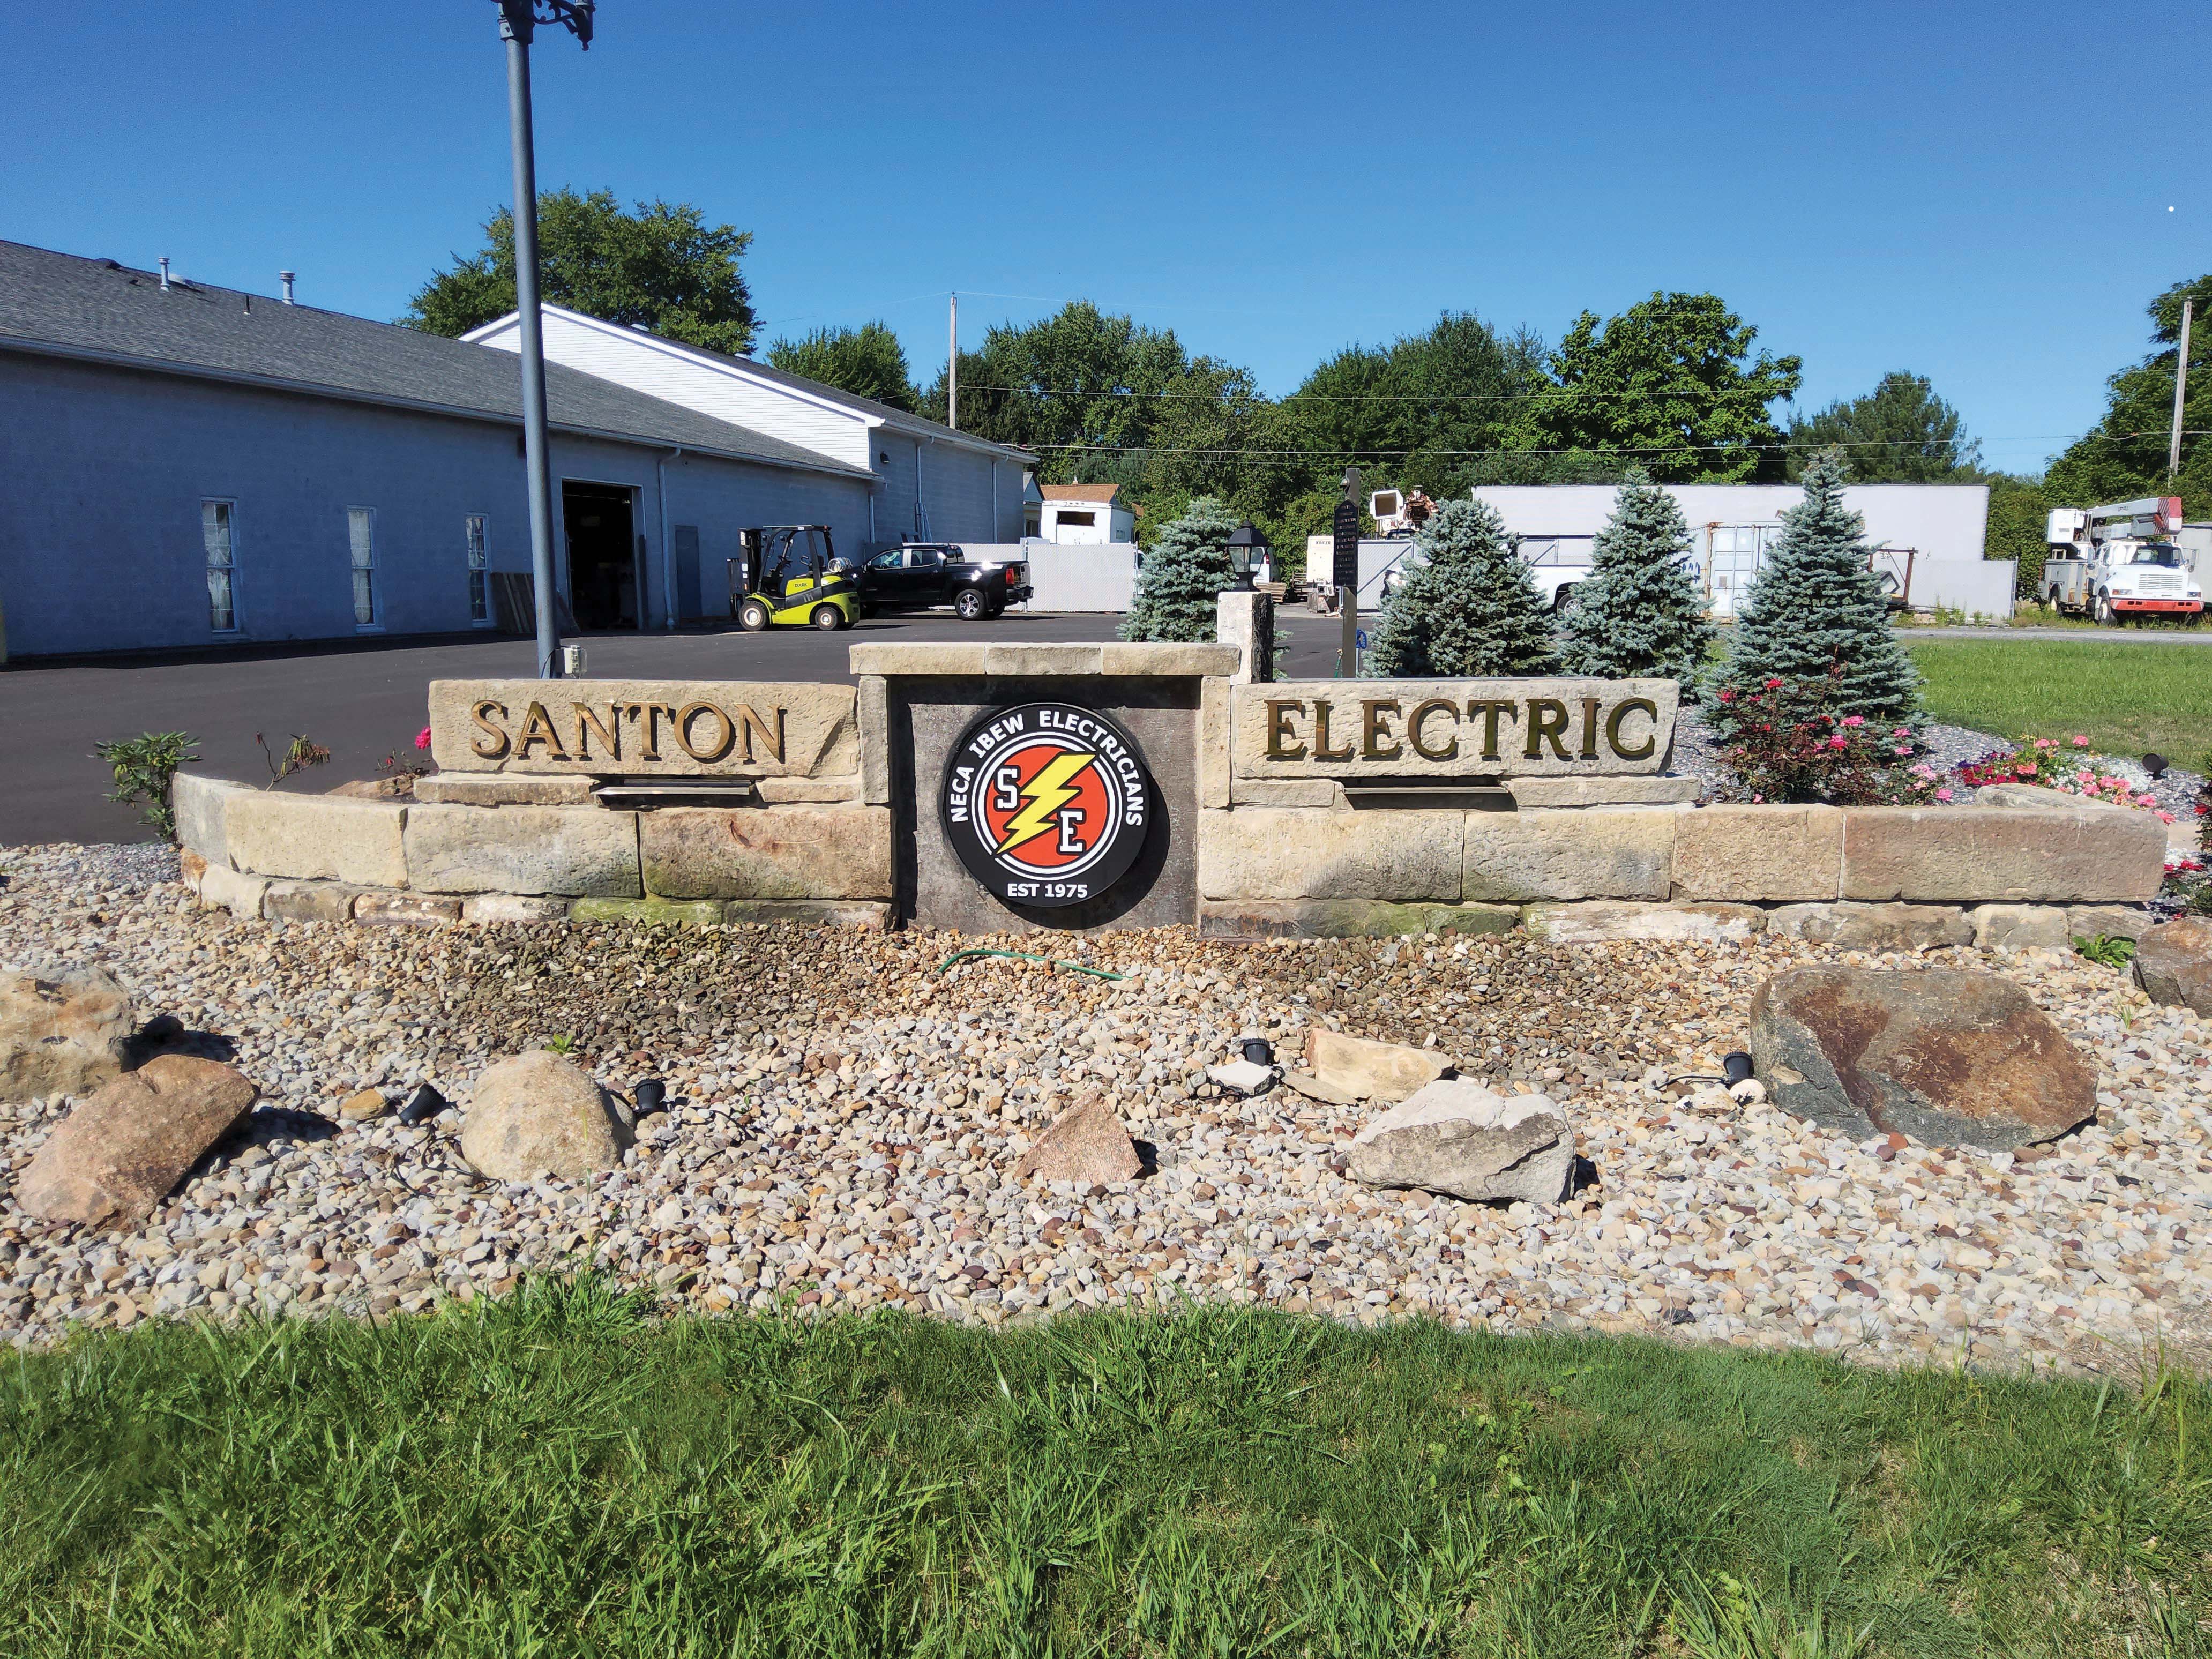 Stone wall with a Santon Electric sign. Image by Santon Electric Co. Inc.